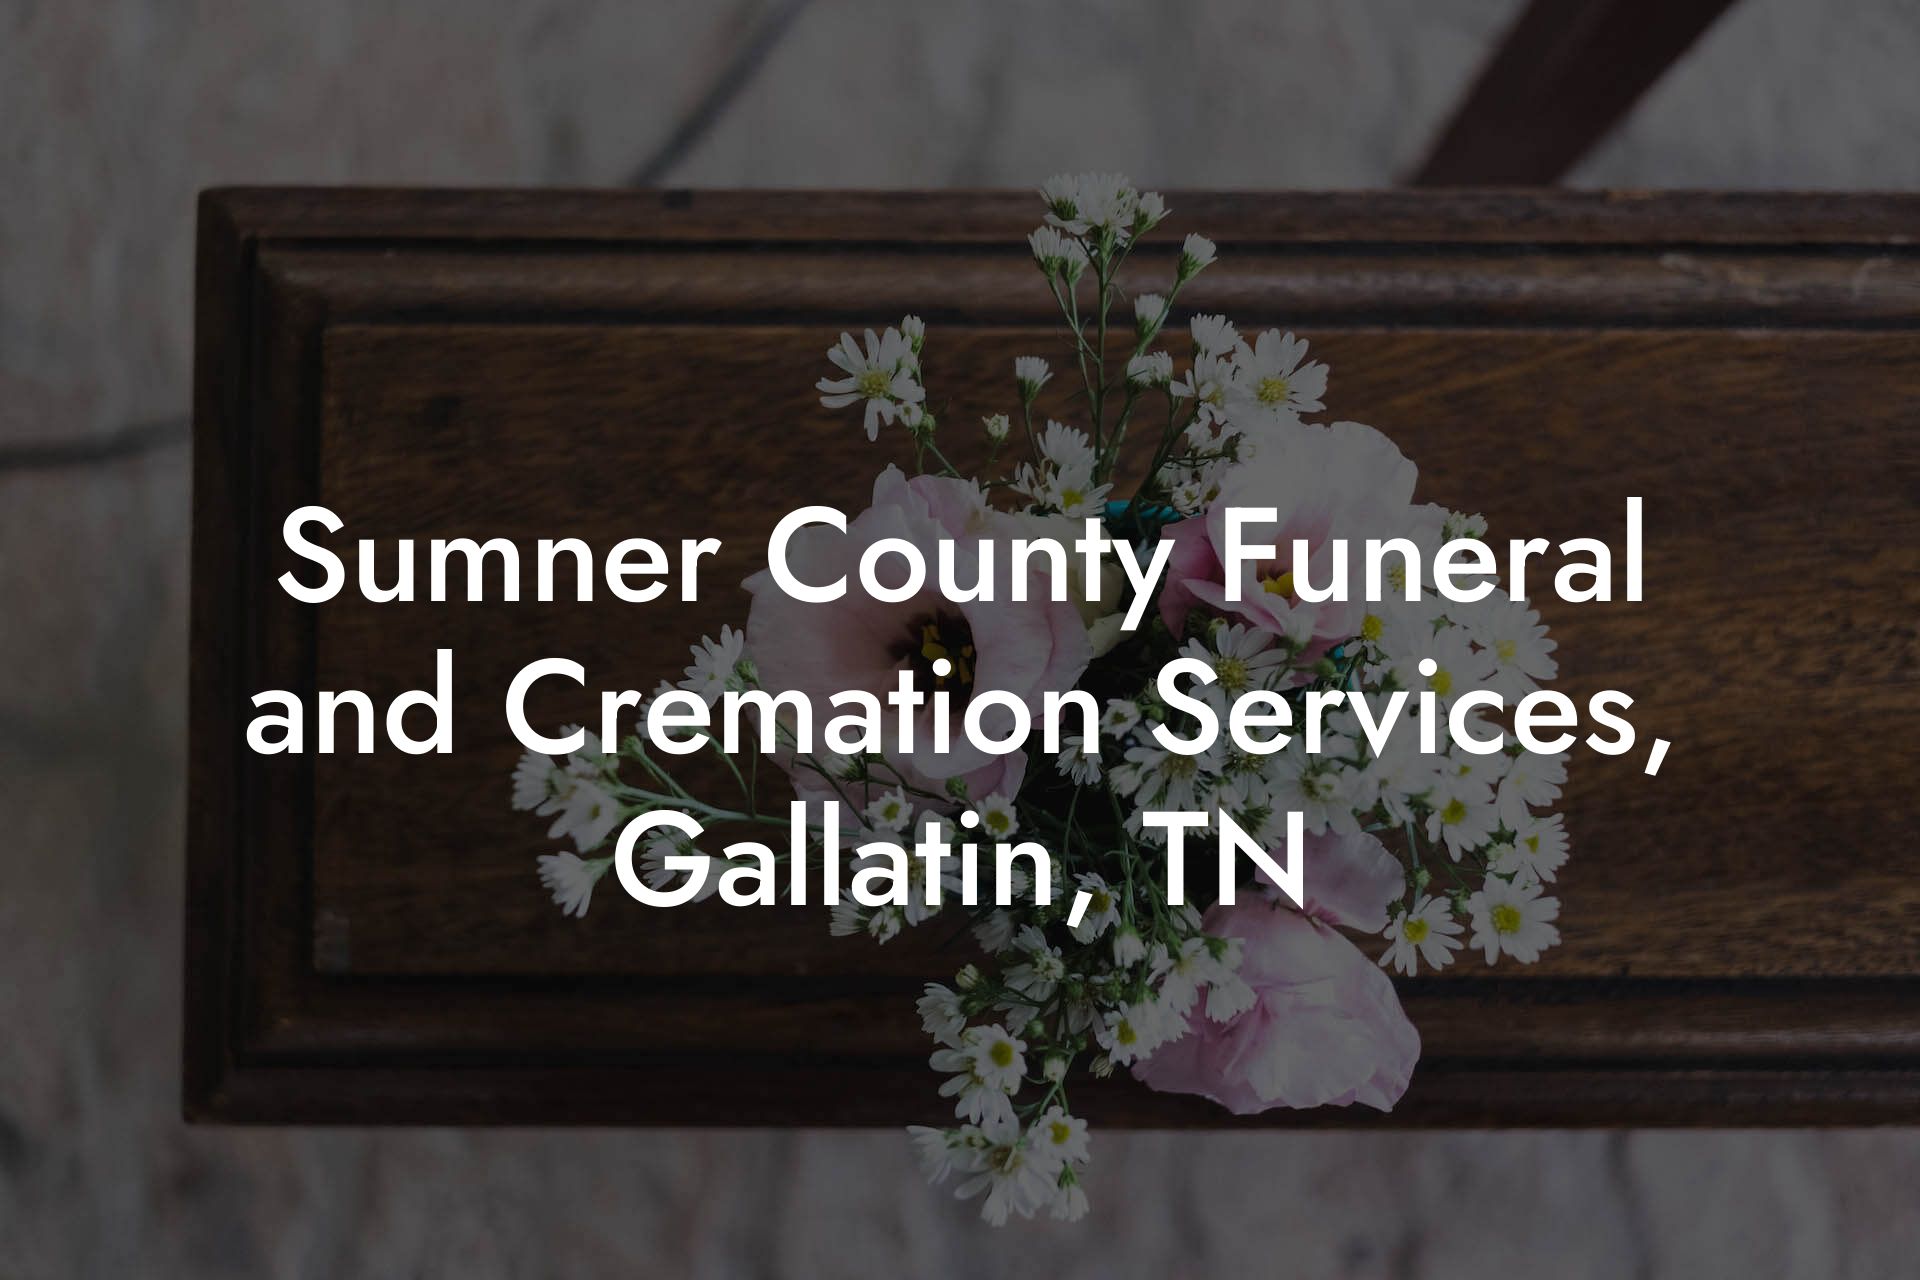 Sumner County Funeral and Cremation Services, Gallatin, TN